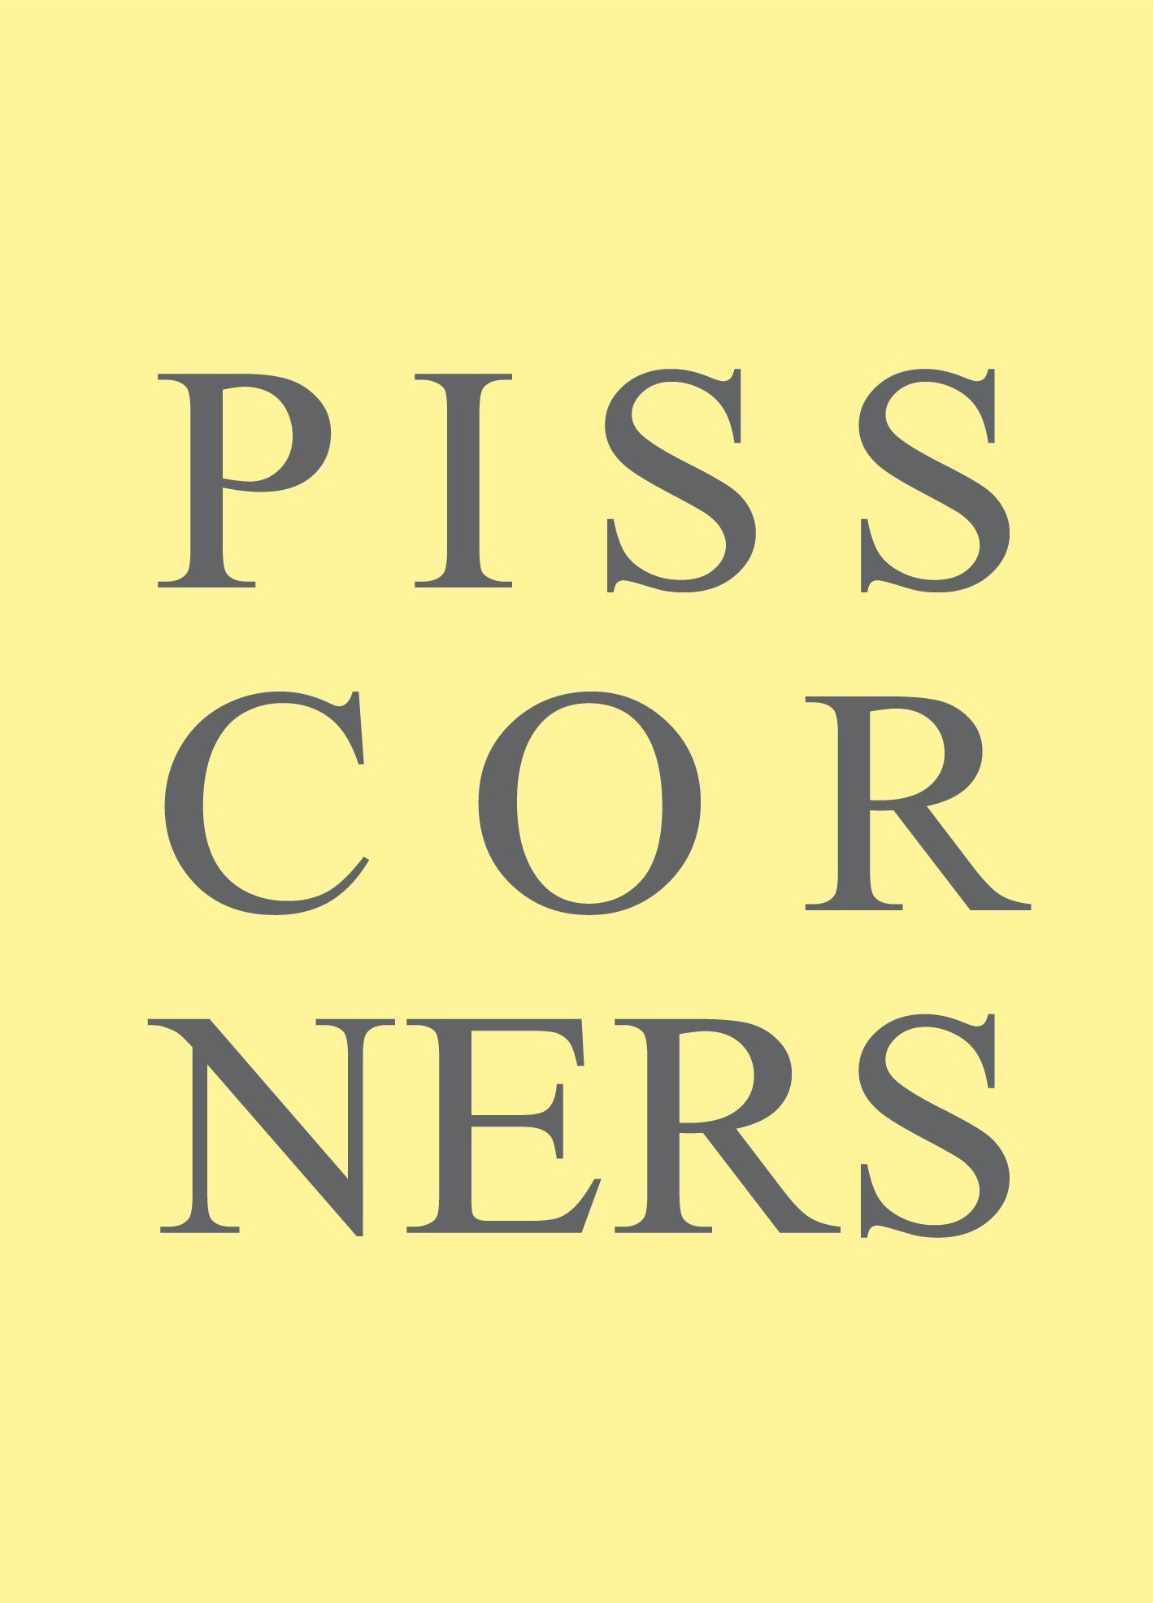 The cover of the book is the title - Piss Corner - in capital serif letters in grey on a pale yellow background